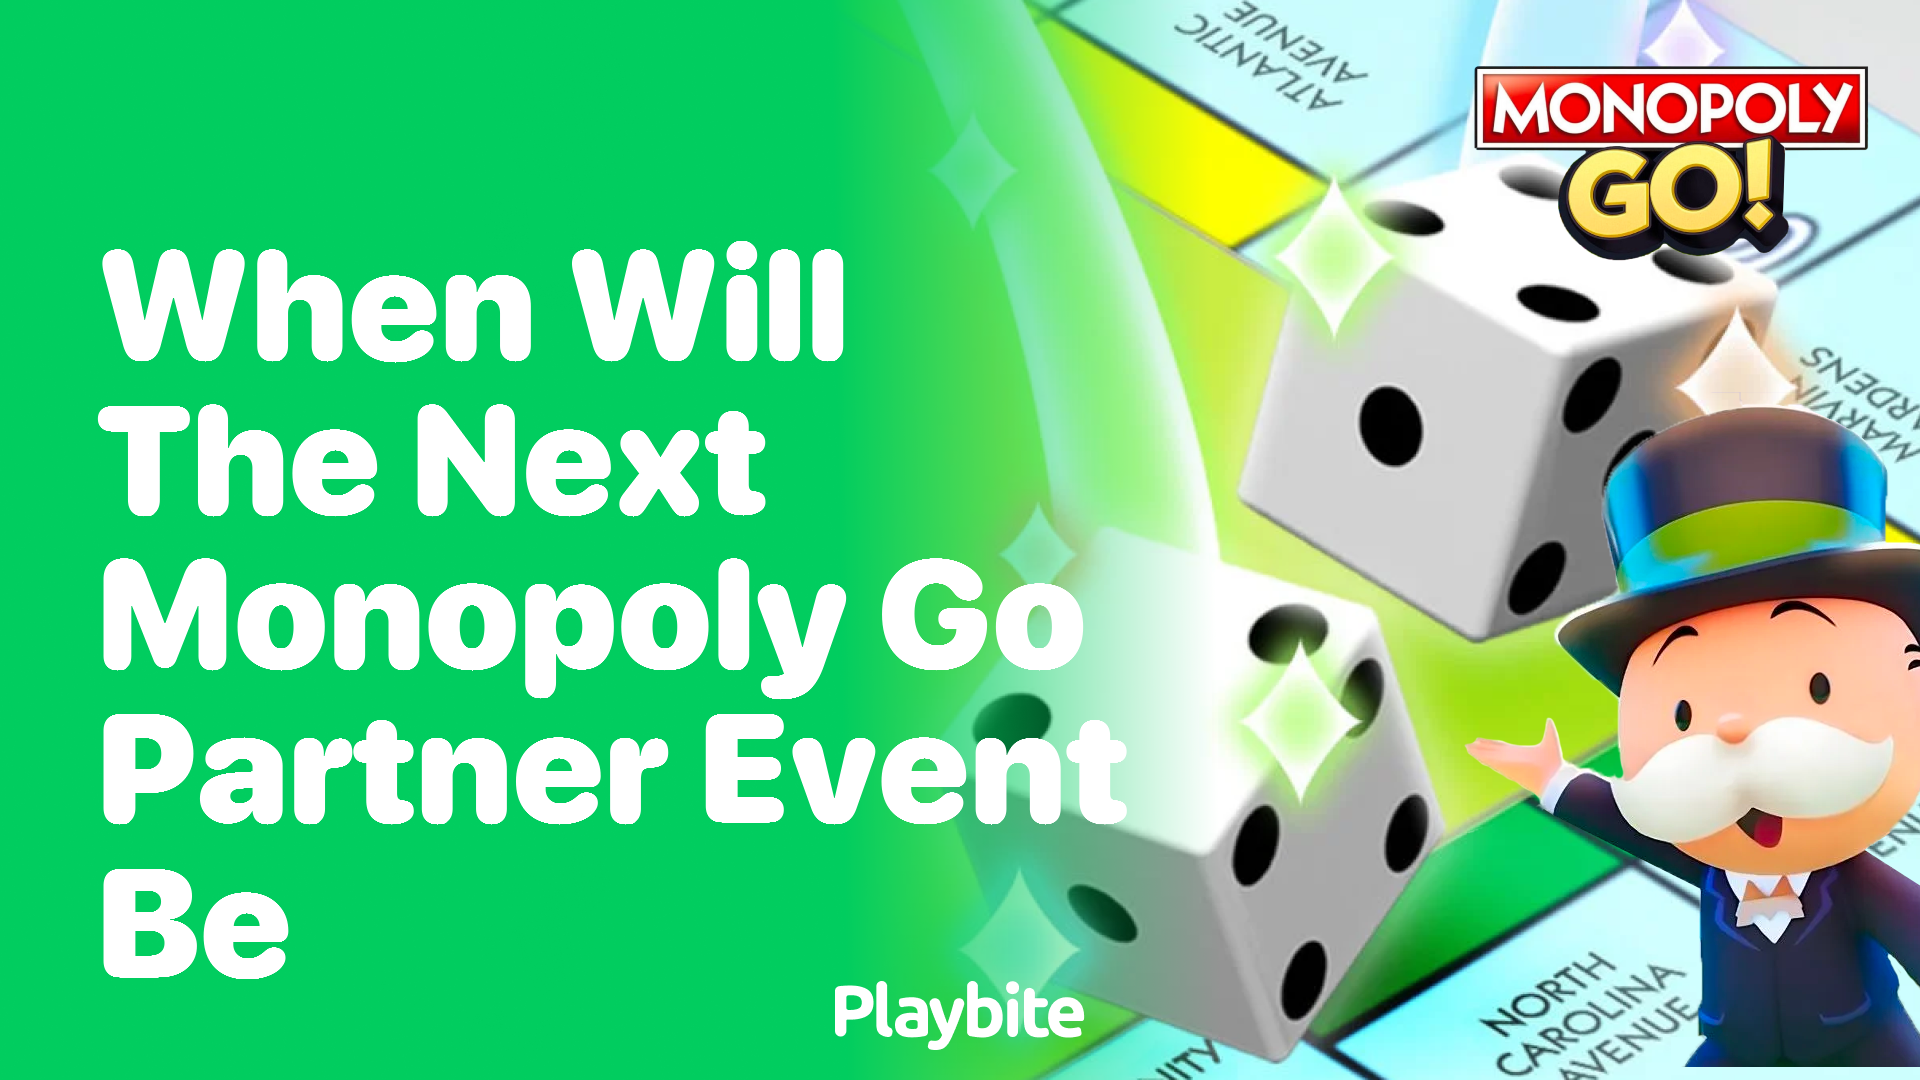 When Will the Next Monopoly Go Partner Event Be?